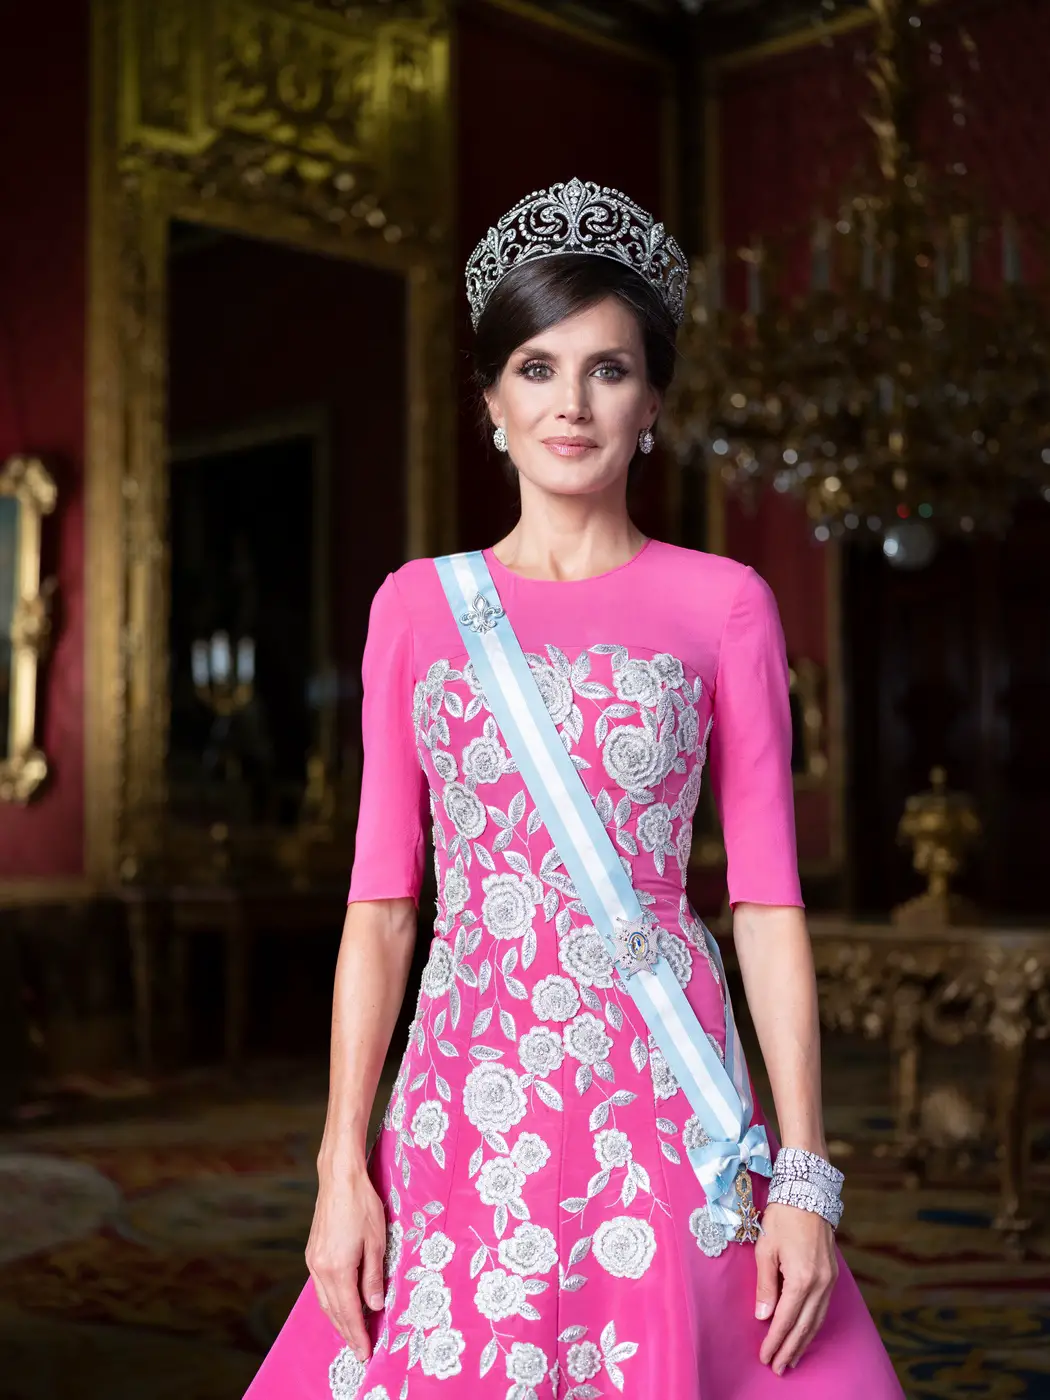 Queen Letizia's official portrait released by the palace has her in full regalia